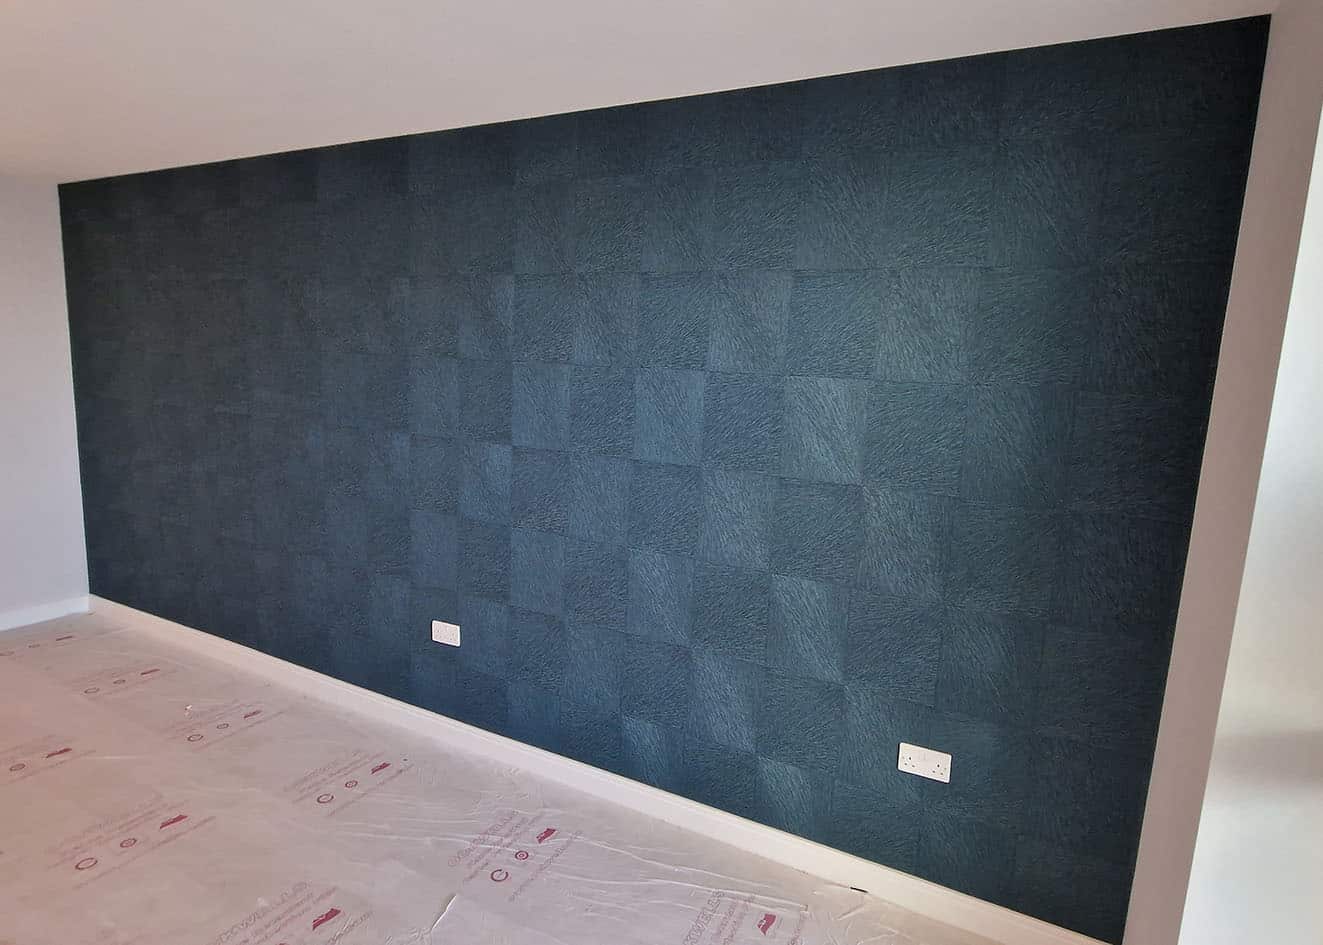 Feature wall wallpaper installation, blue textured wallpaper from Tektura installed by our wallpaper hangers.